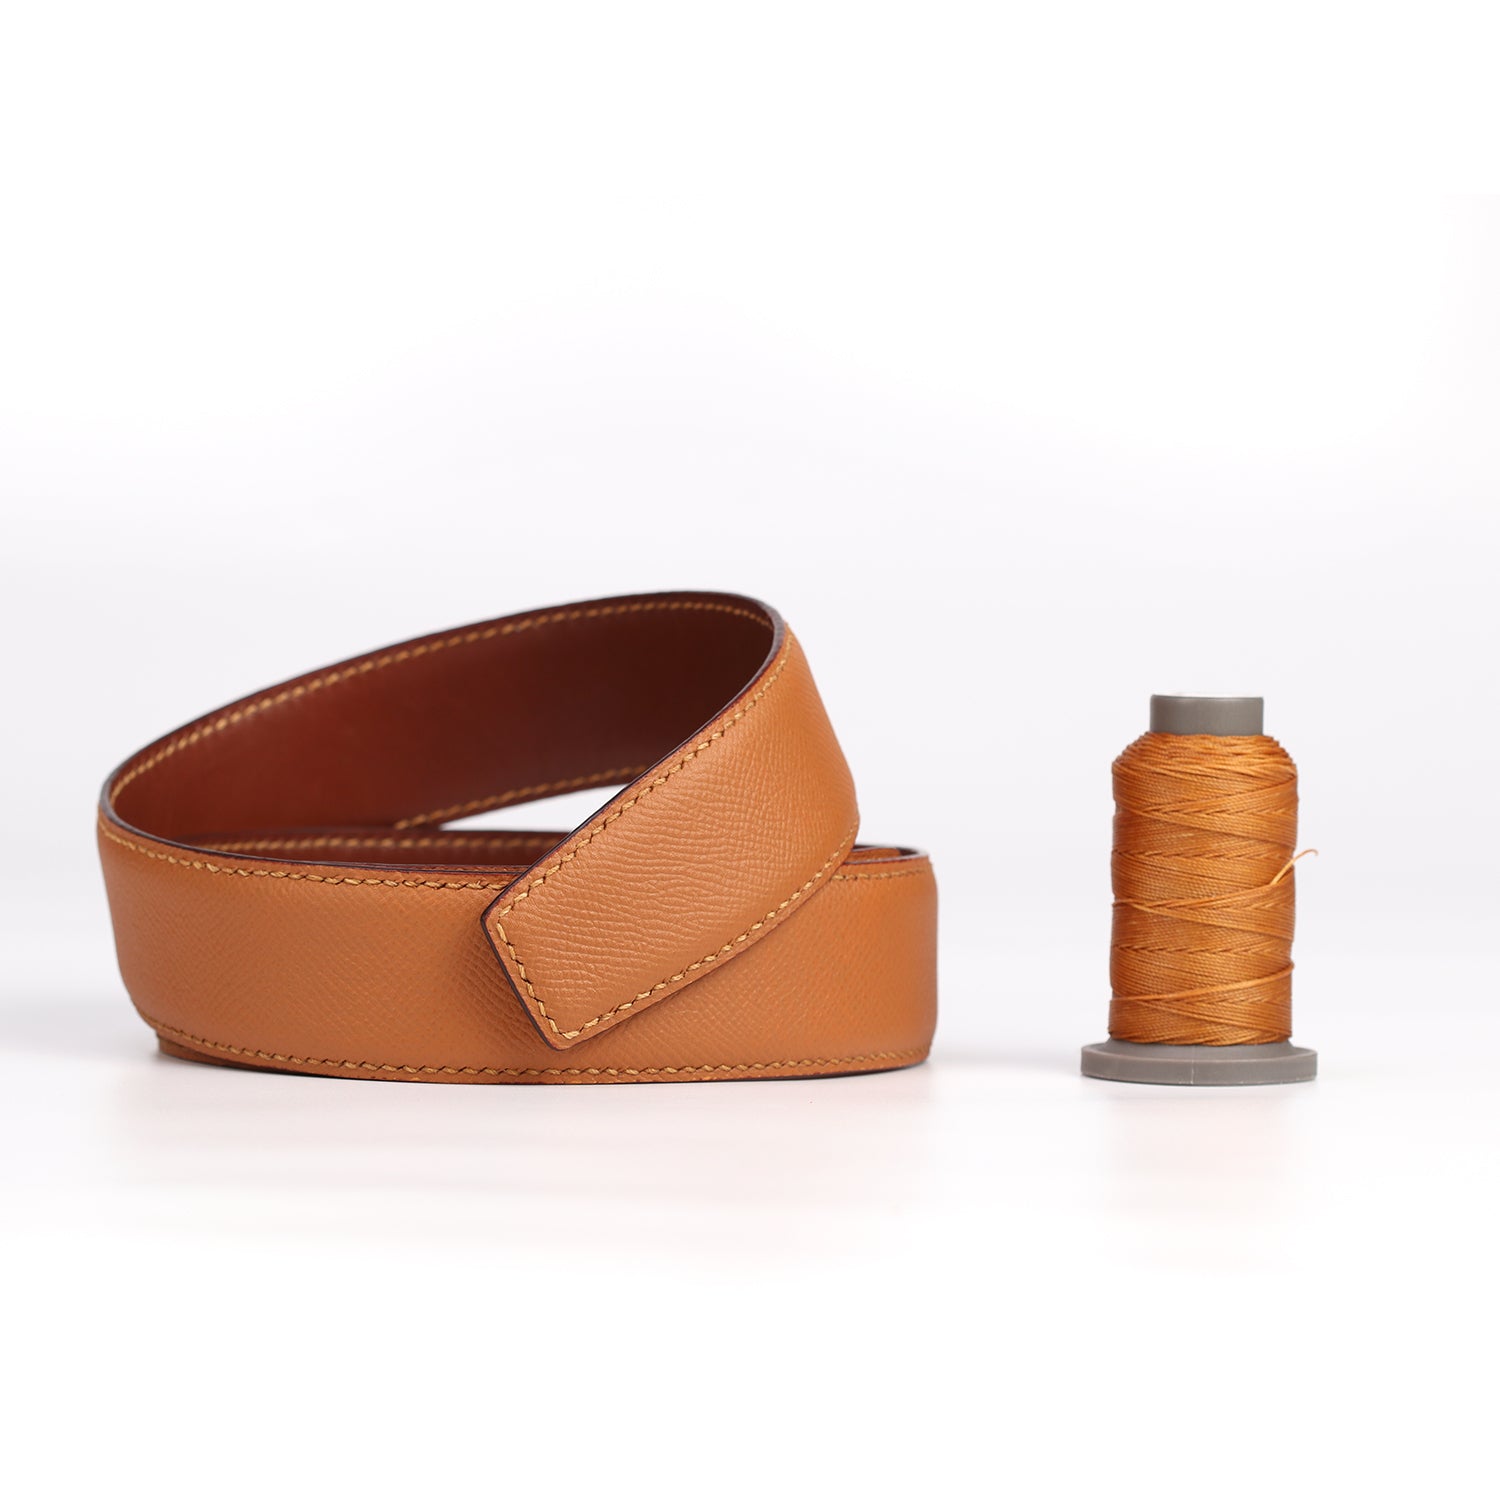 buckle – Hand and Sew Leather